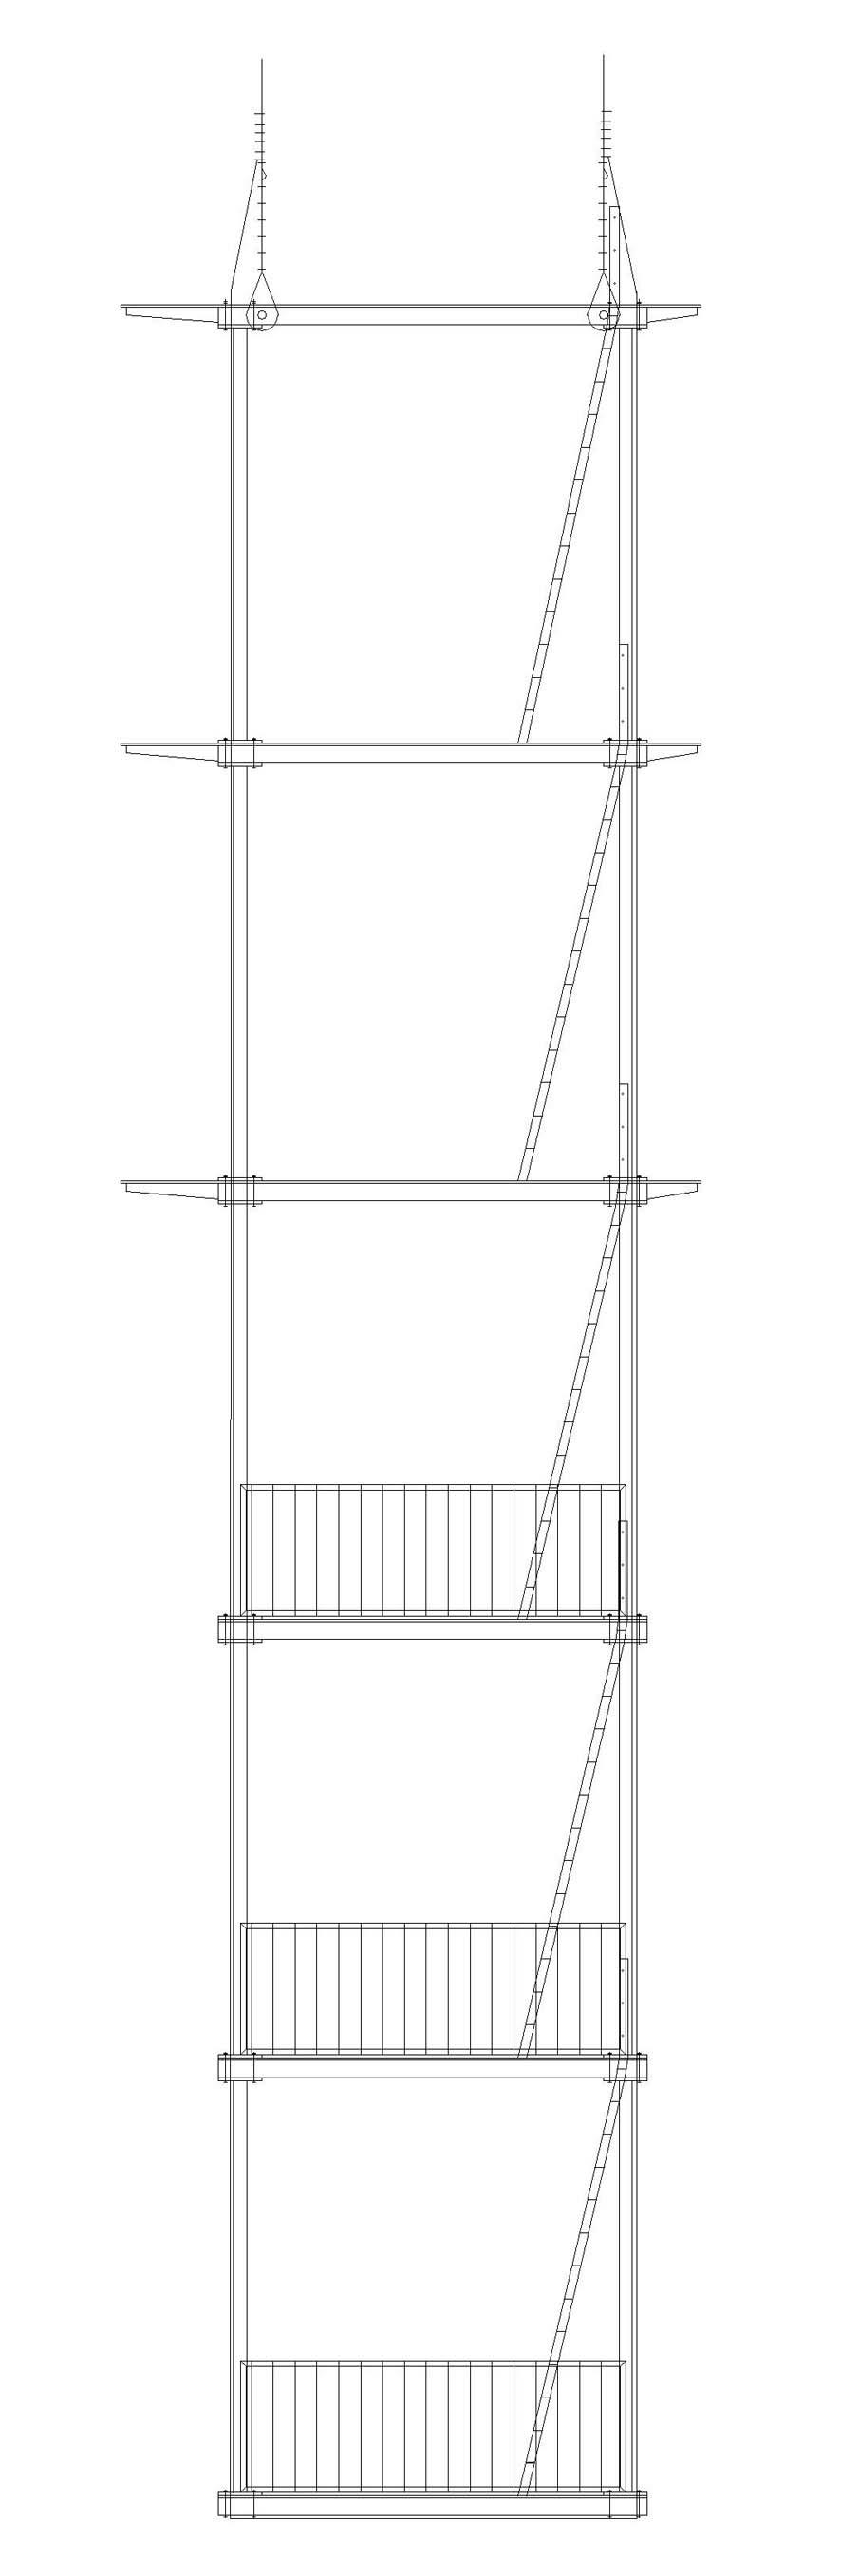 Fast construction method of headframe lifting system